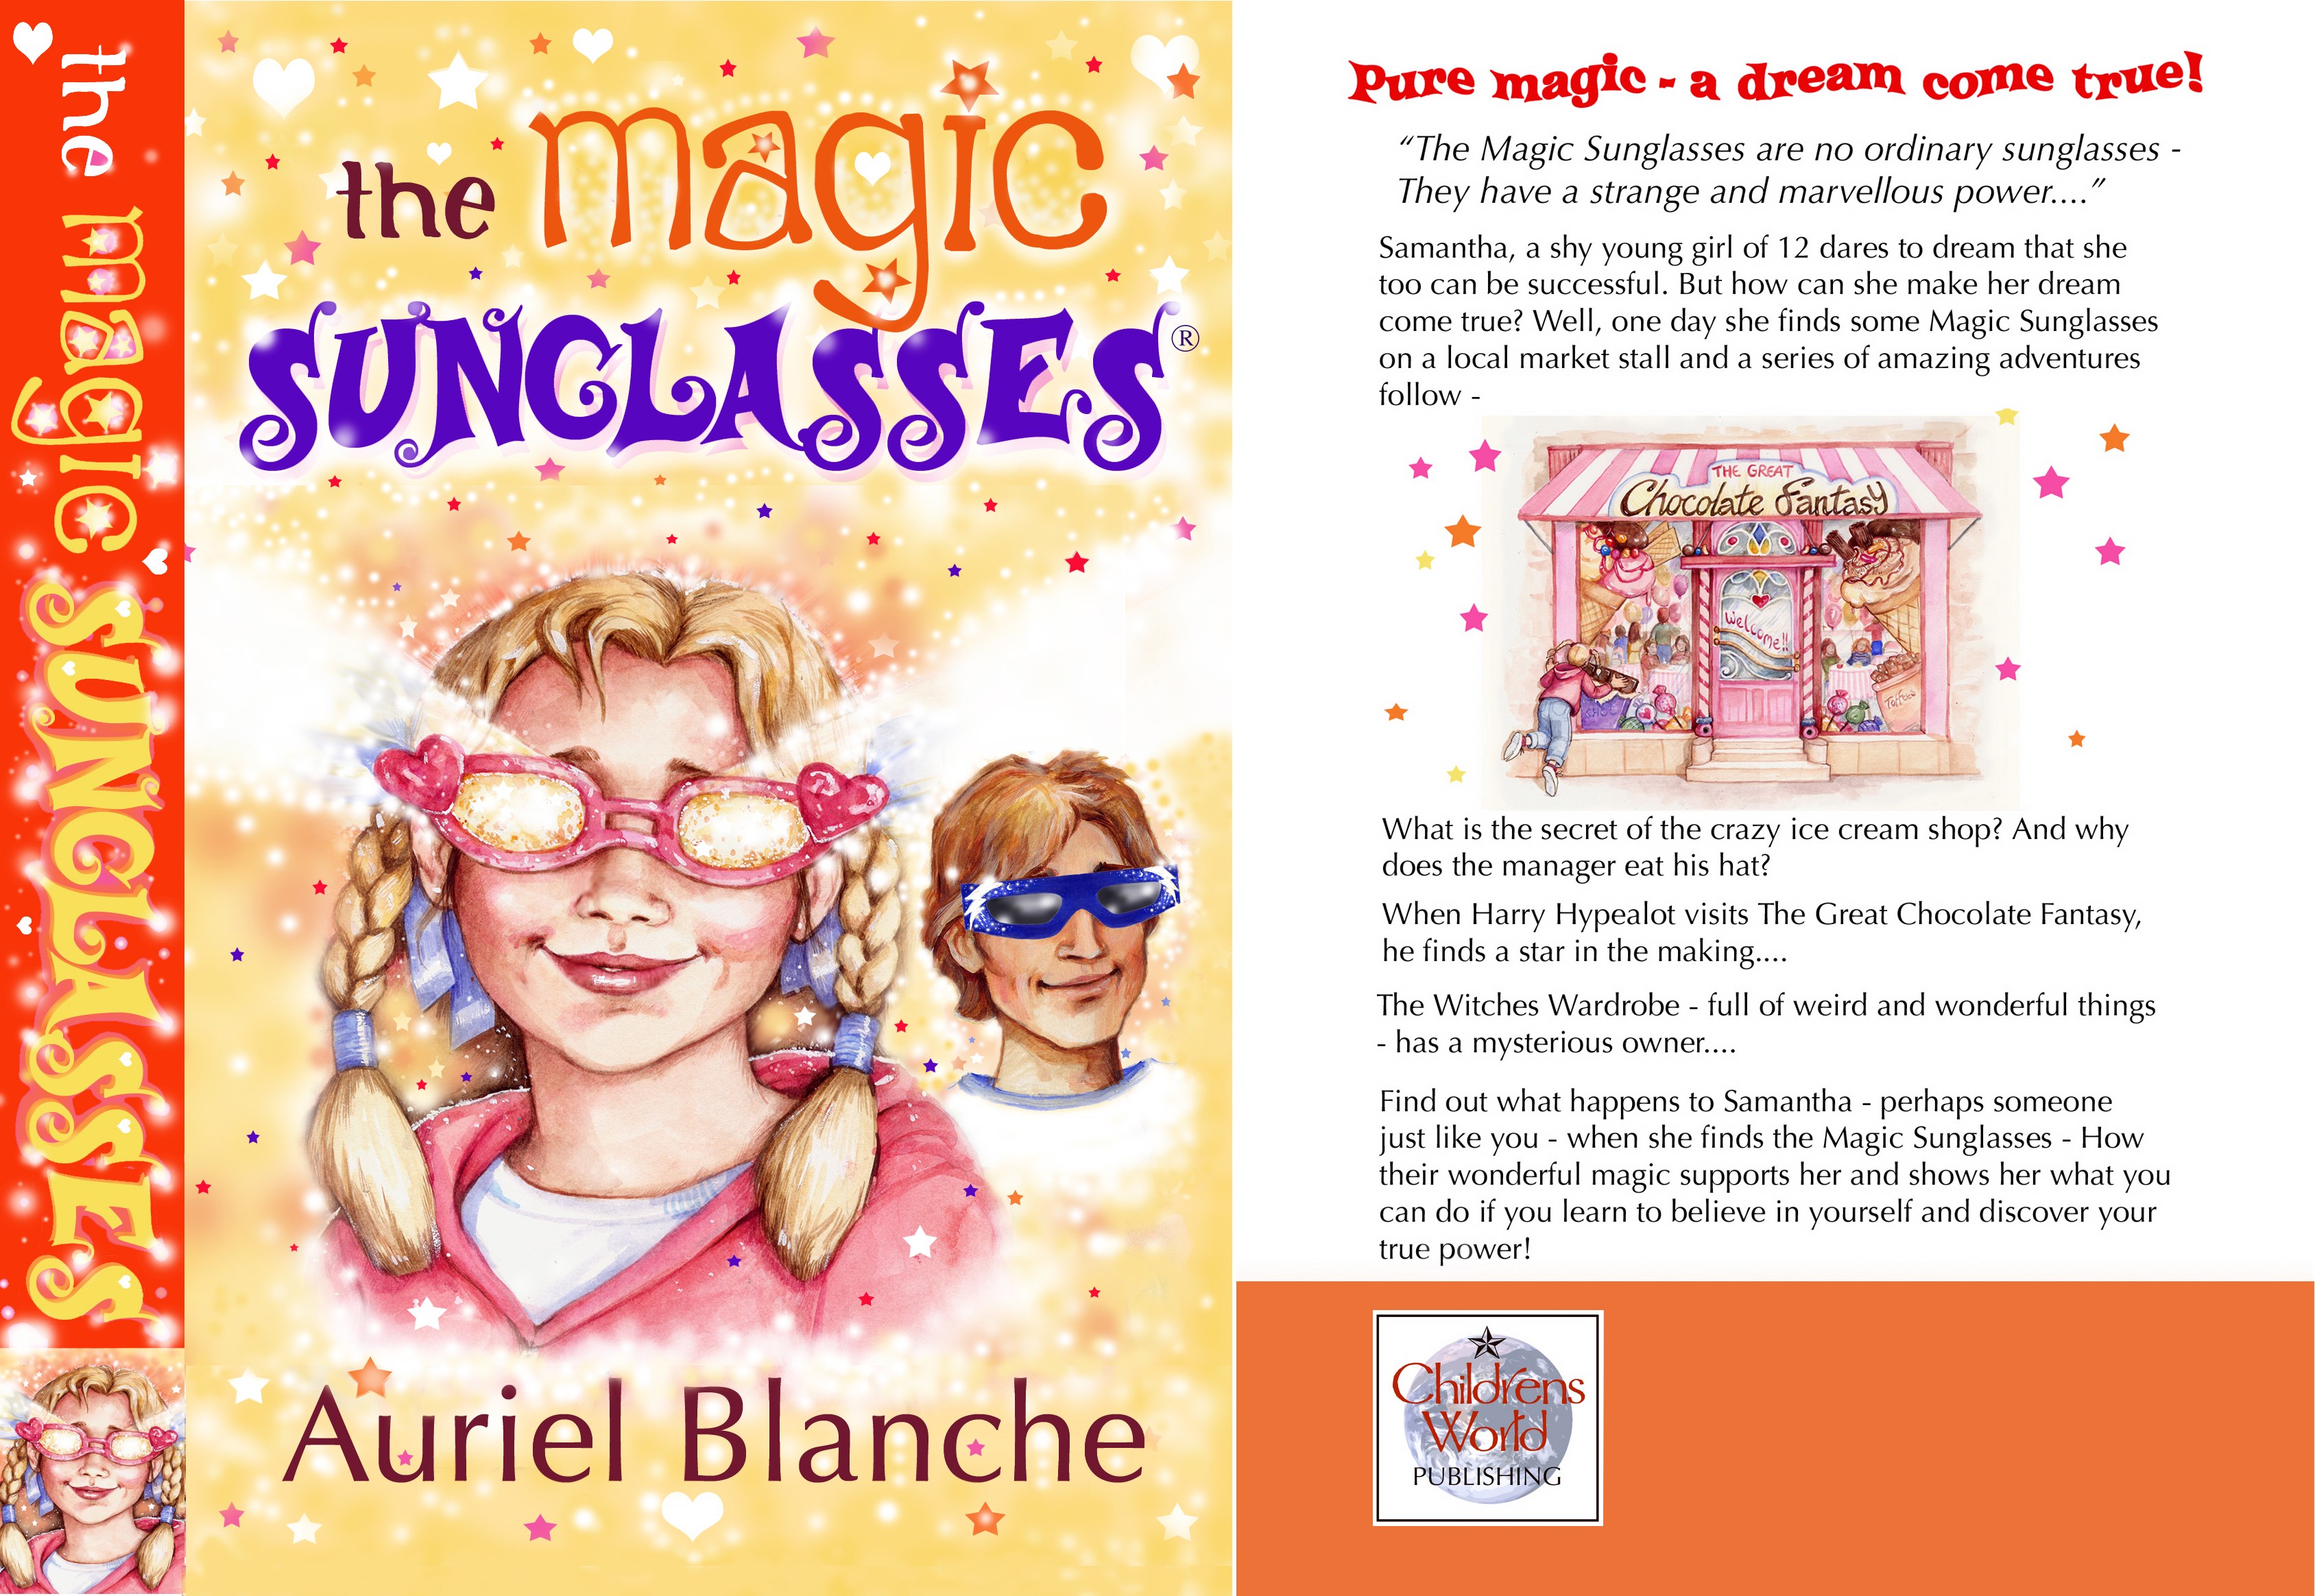 The Magic Sunglasses Book in Paperback from